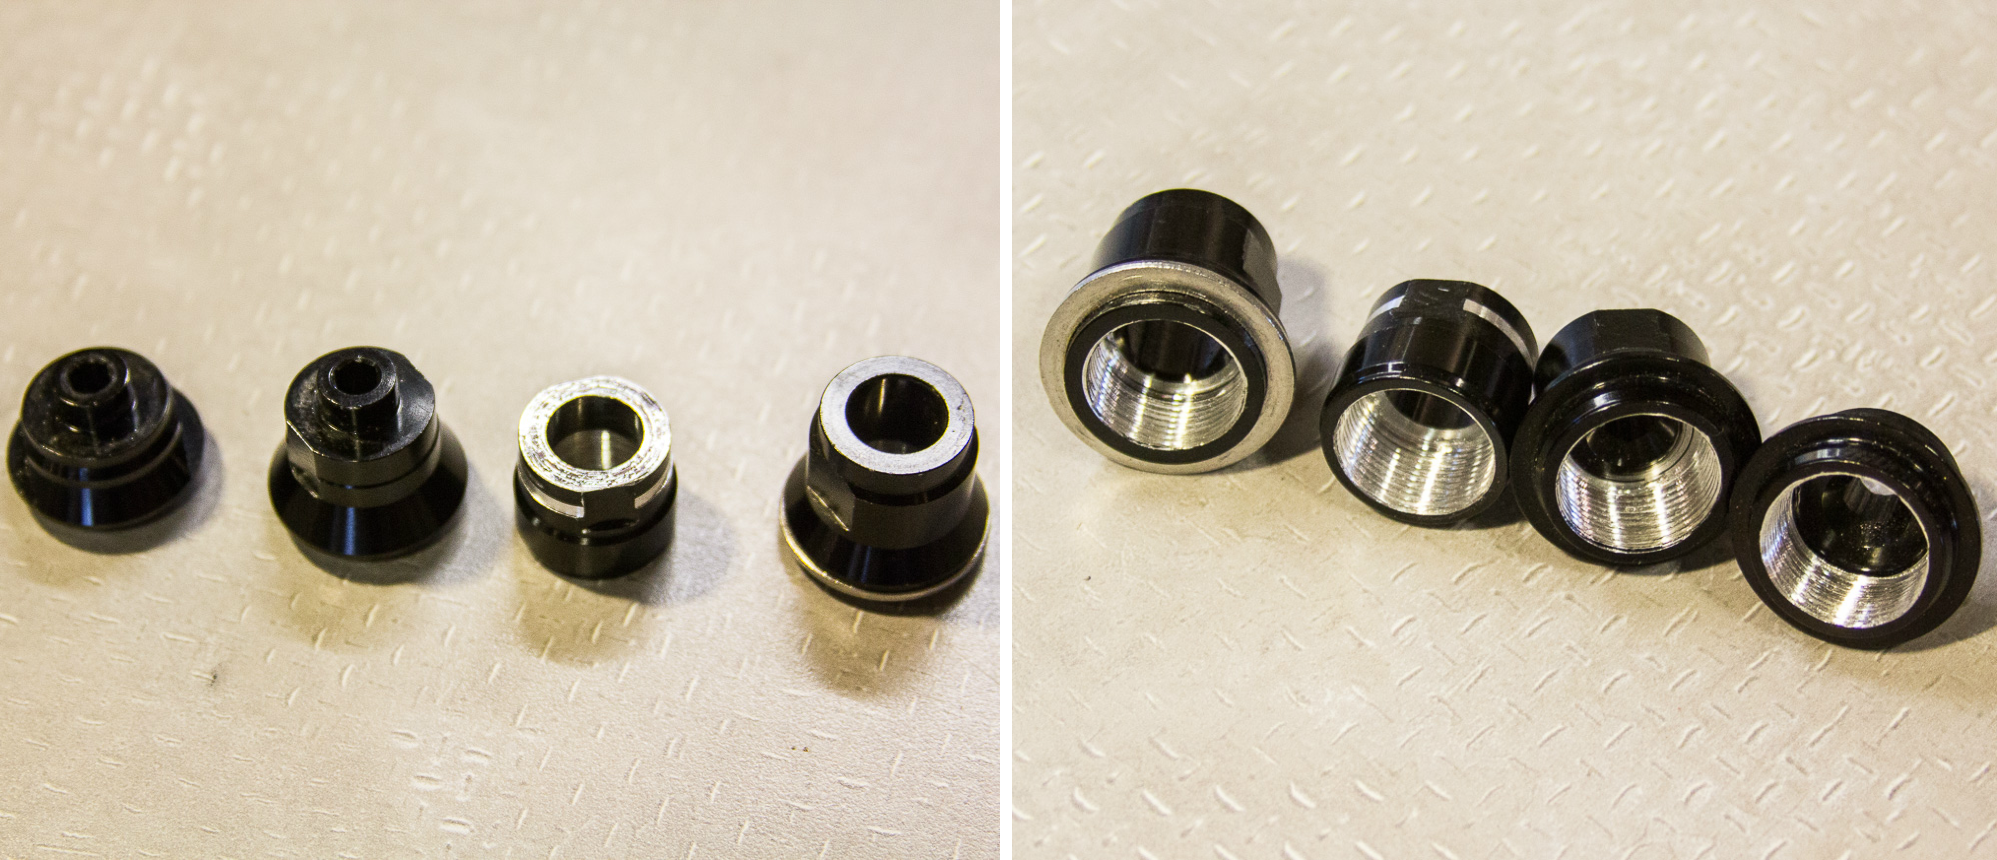 Cycleops hammer Axle inserts